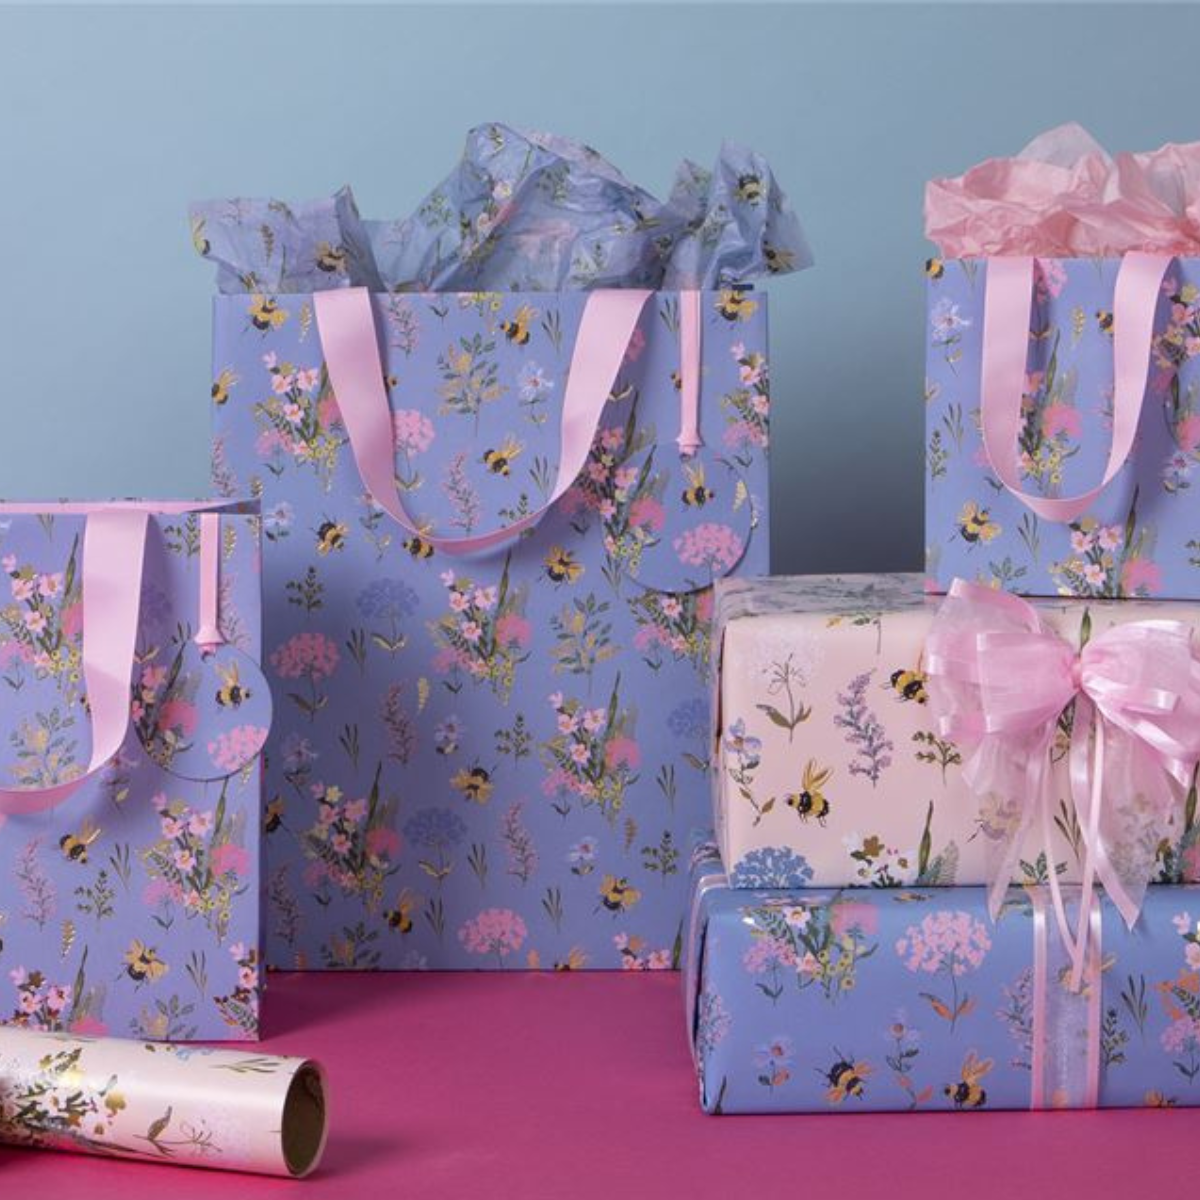 Lifestyle image with co ordinating bags and tissue paper